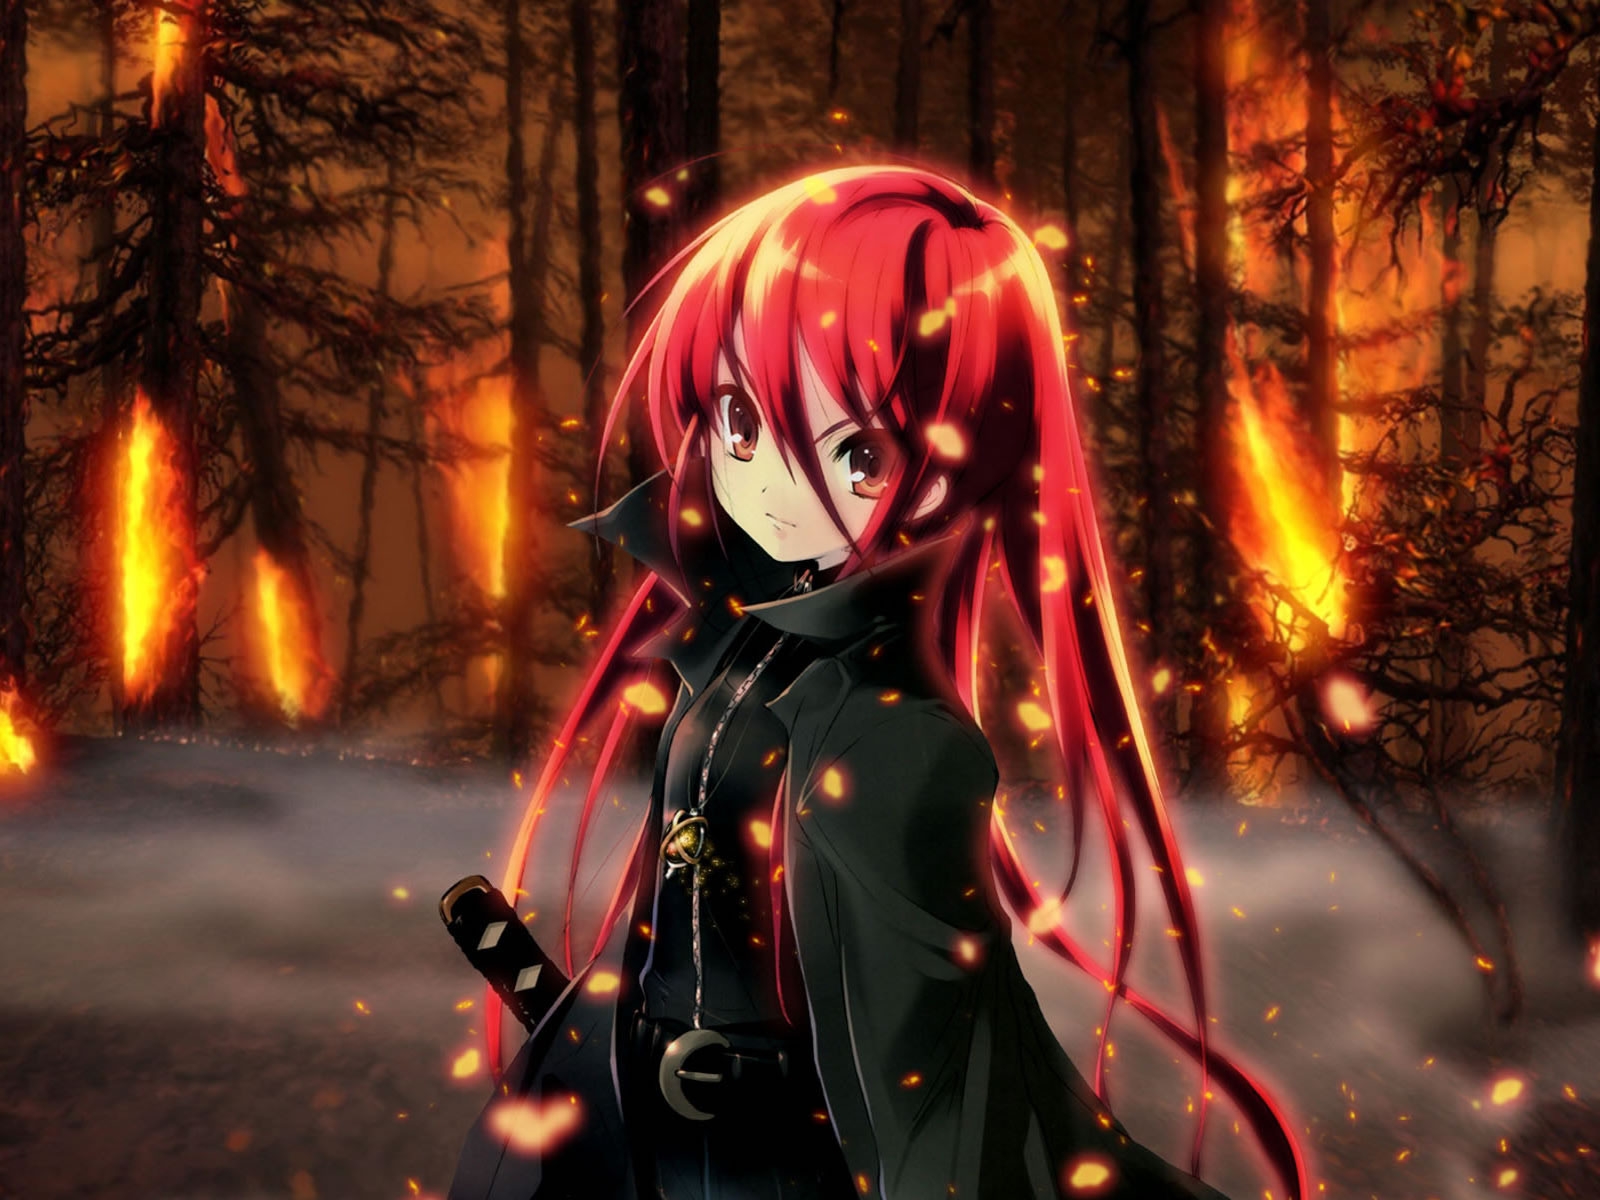 Beautiful Girl in Fire for 1600 x 1200 resolution